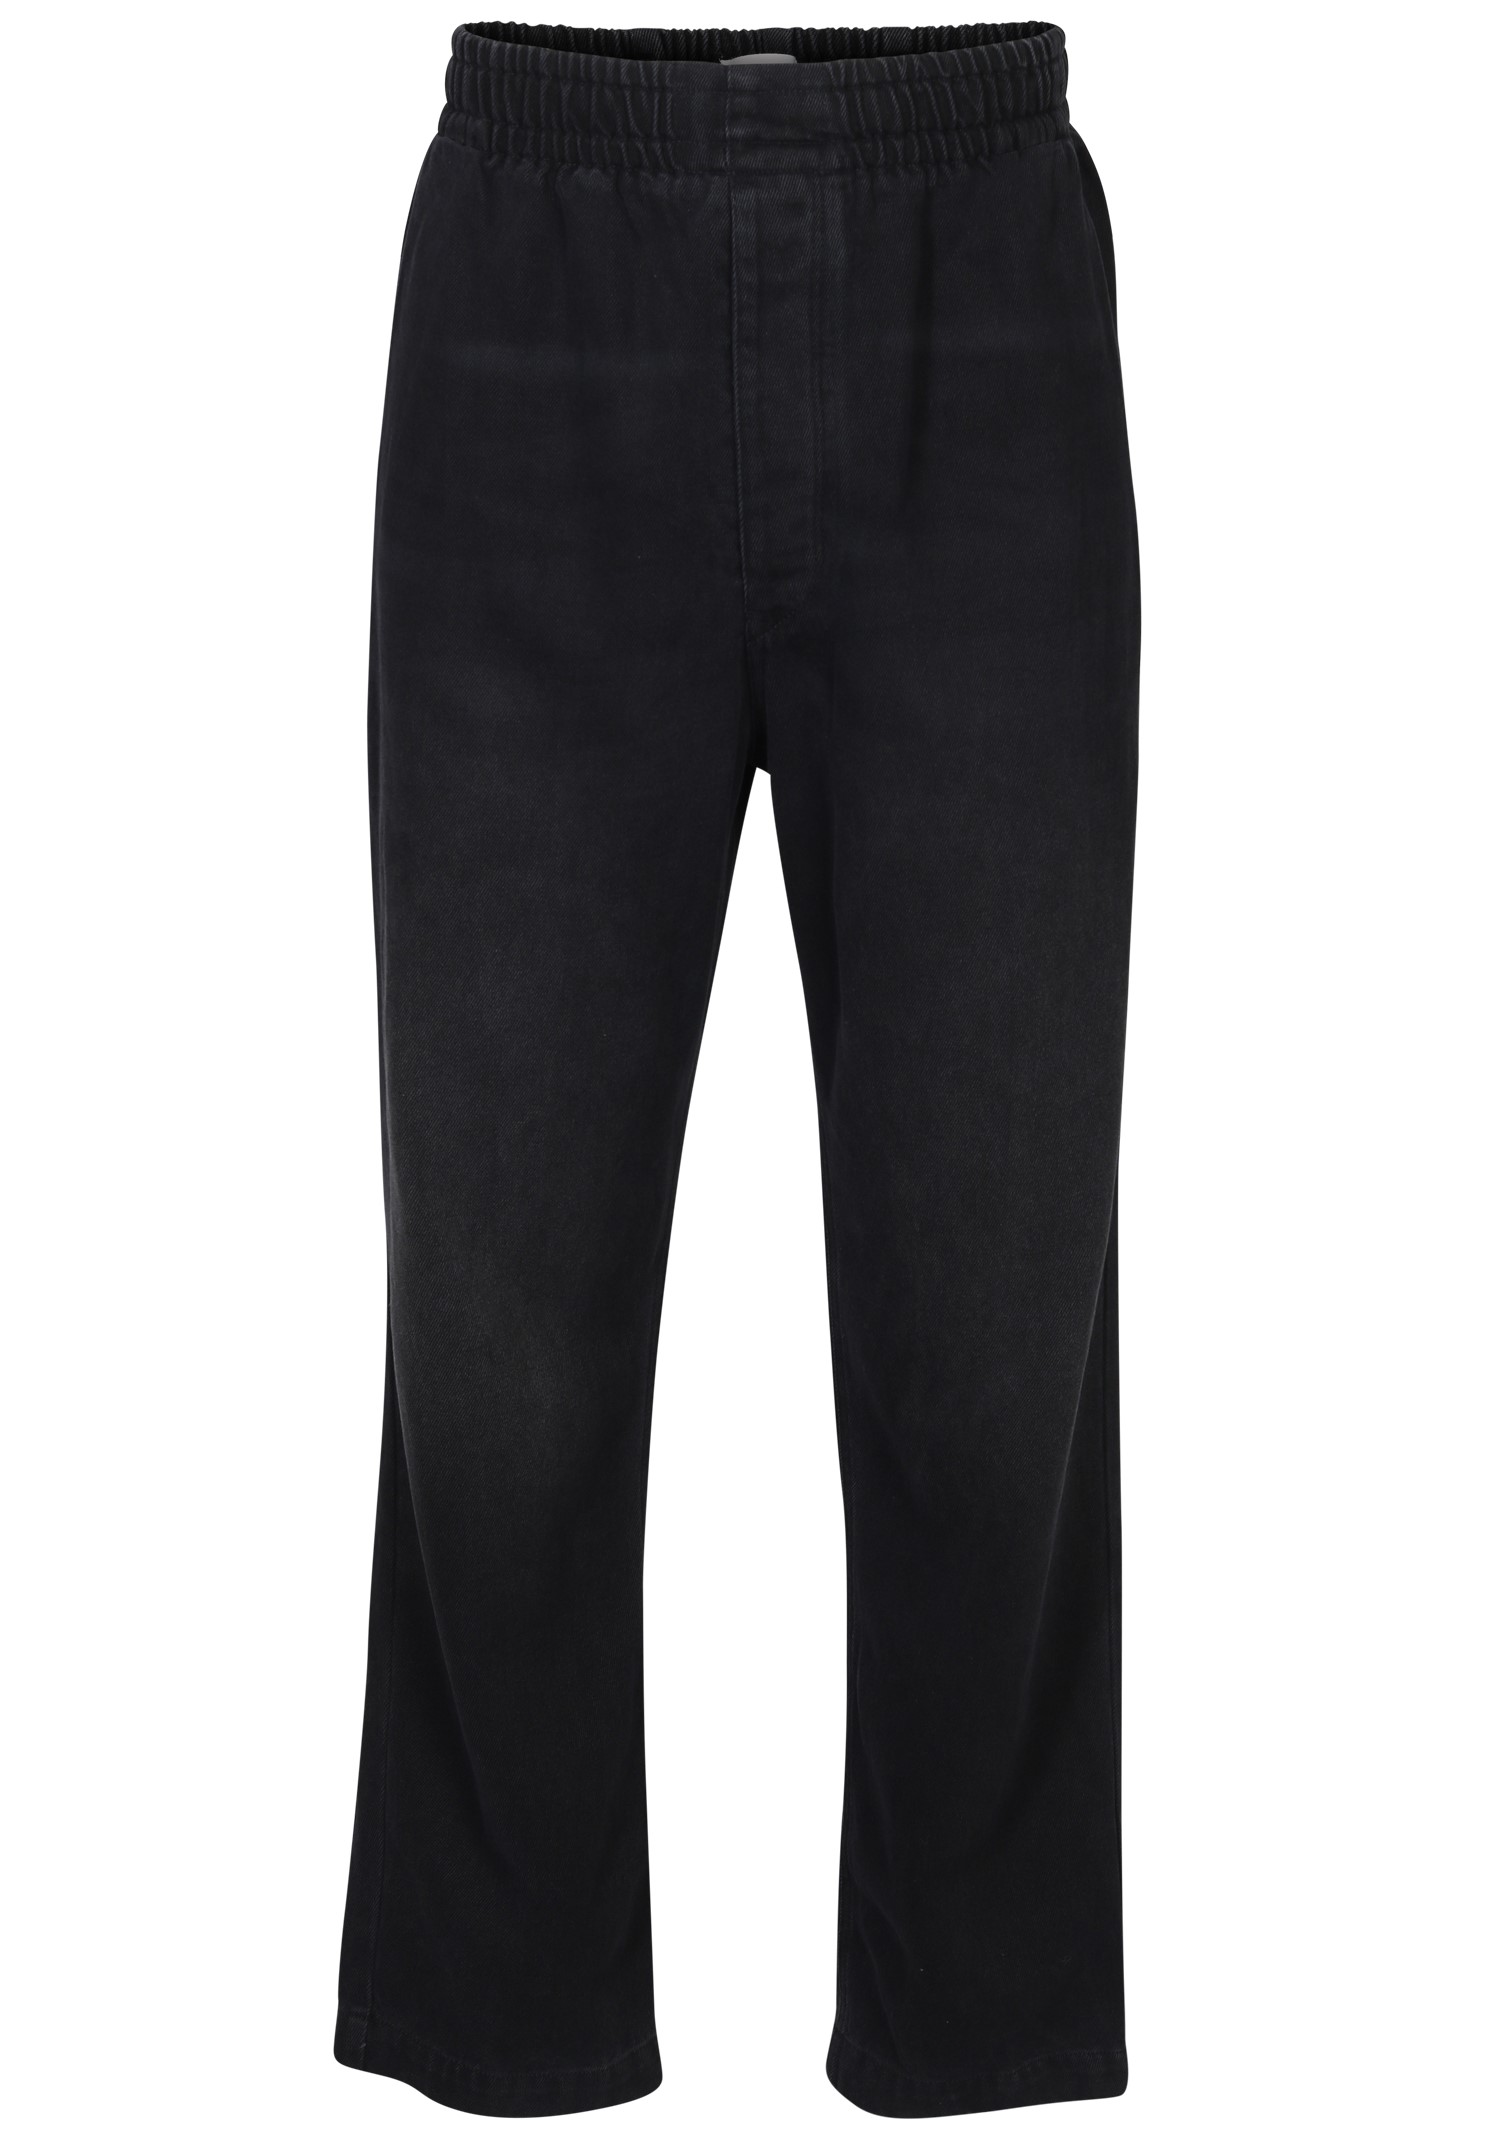 ISABEL MARANT Timeo Pant in Faded Black